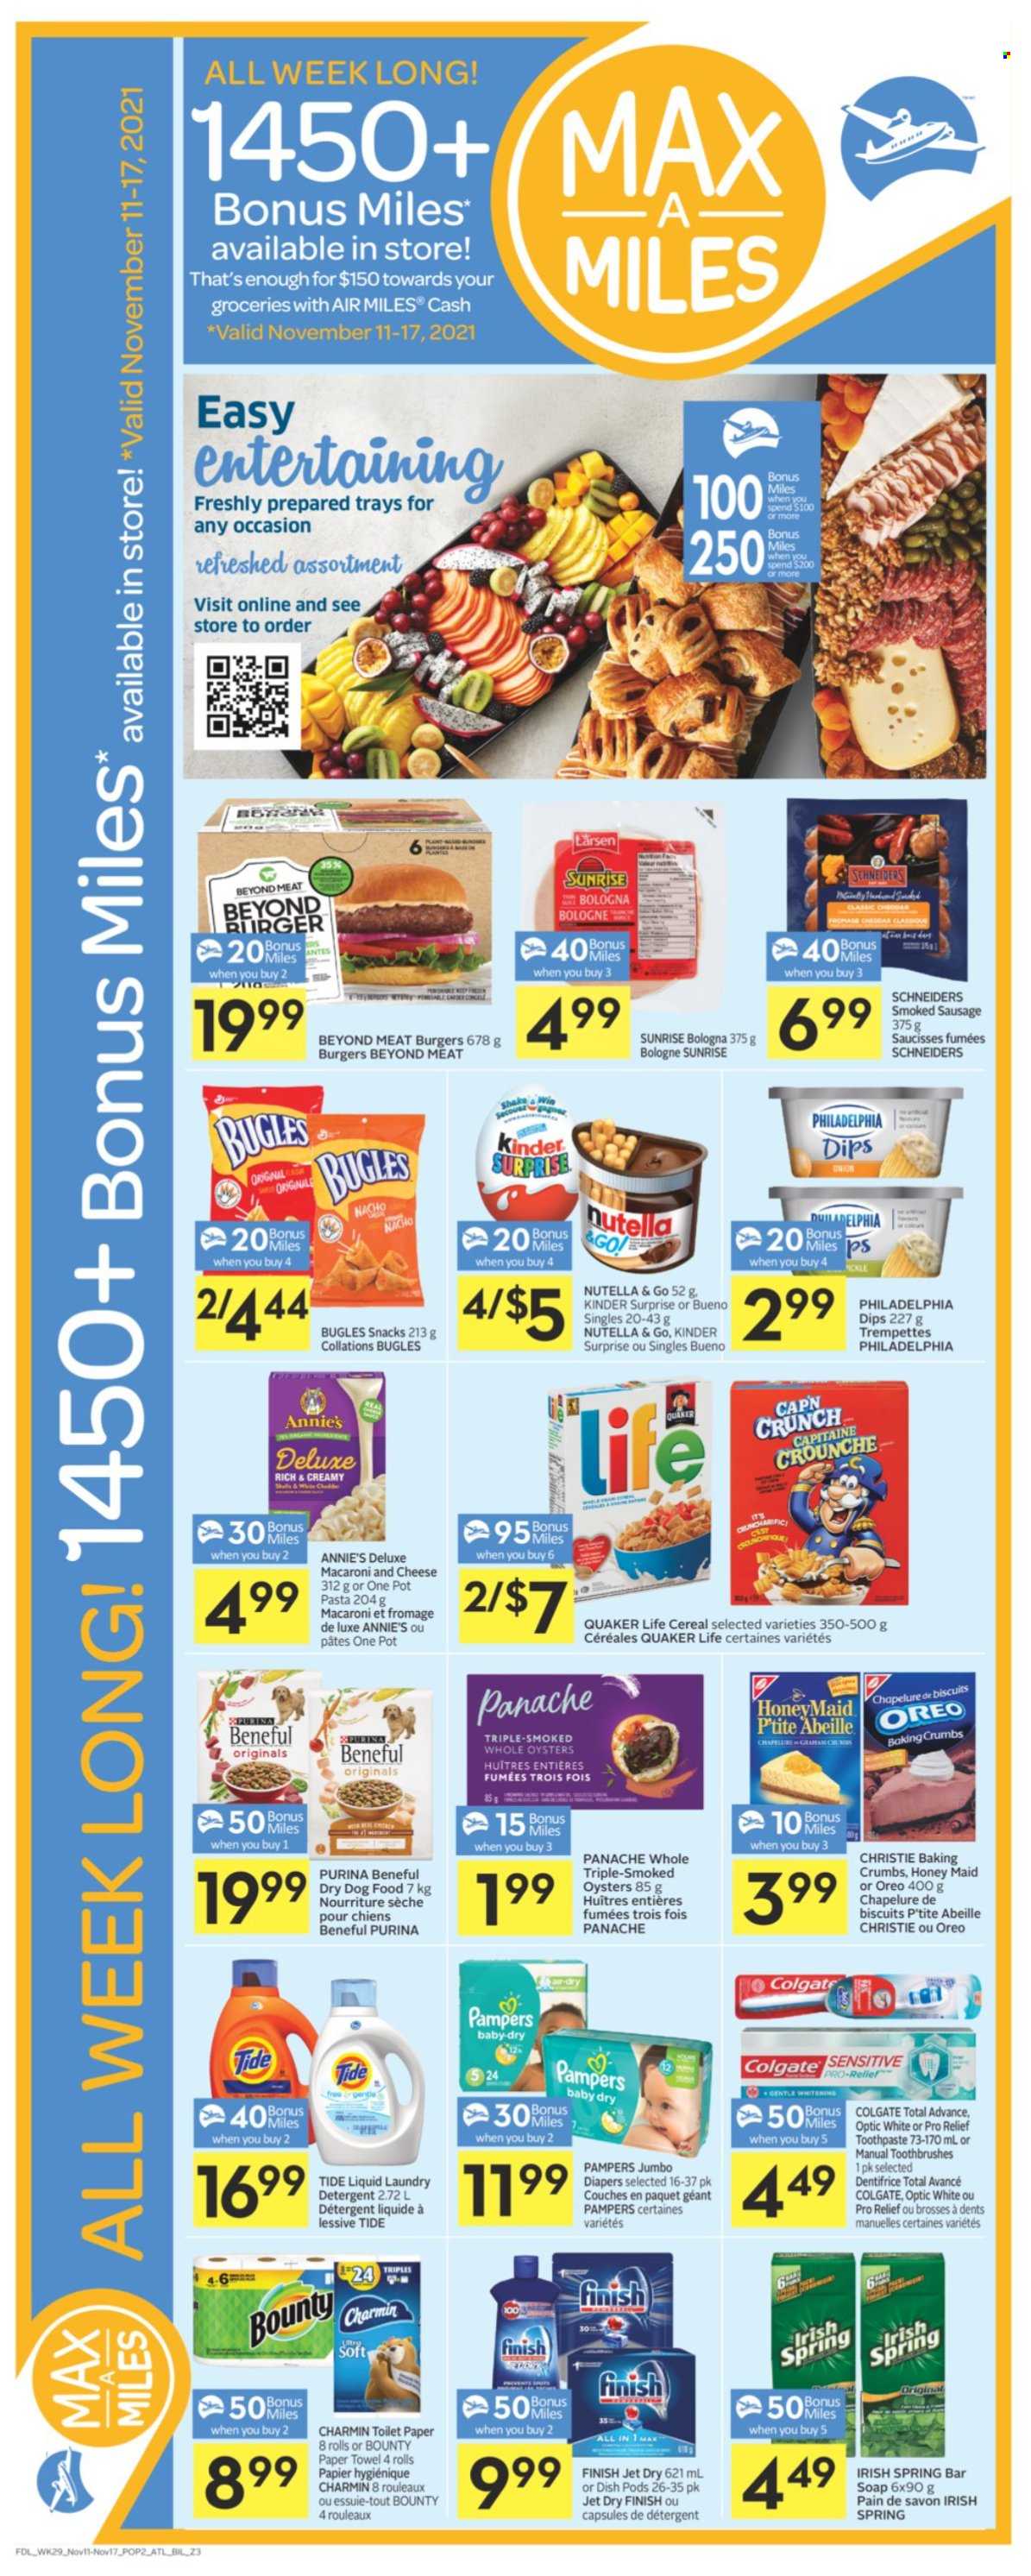 thumbnail - Co-op Flyer - November 11, 2021 - November 17, 2021 - Sales products - smoked oysters, oysters, macaroni & cheese, hamburger, pasta, Quaker, Annie's, sausage, smoked sausage, snack, Bounty, Kinder Surprise, biscuit, cereals, Honey Maid, Oreo, detergent, Colgate, Philadelphia, Pampers, Nutella. Page 4.